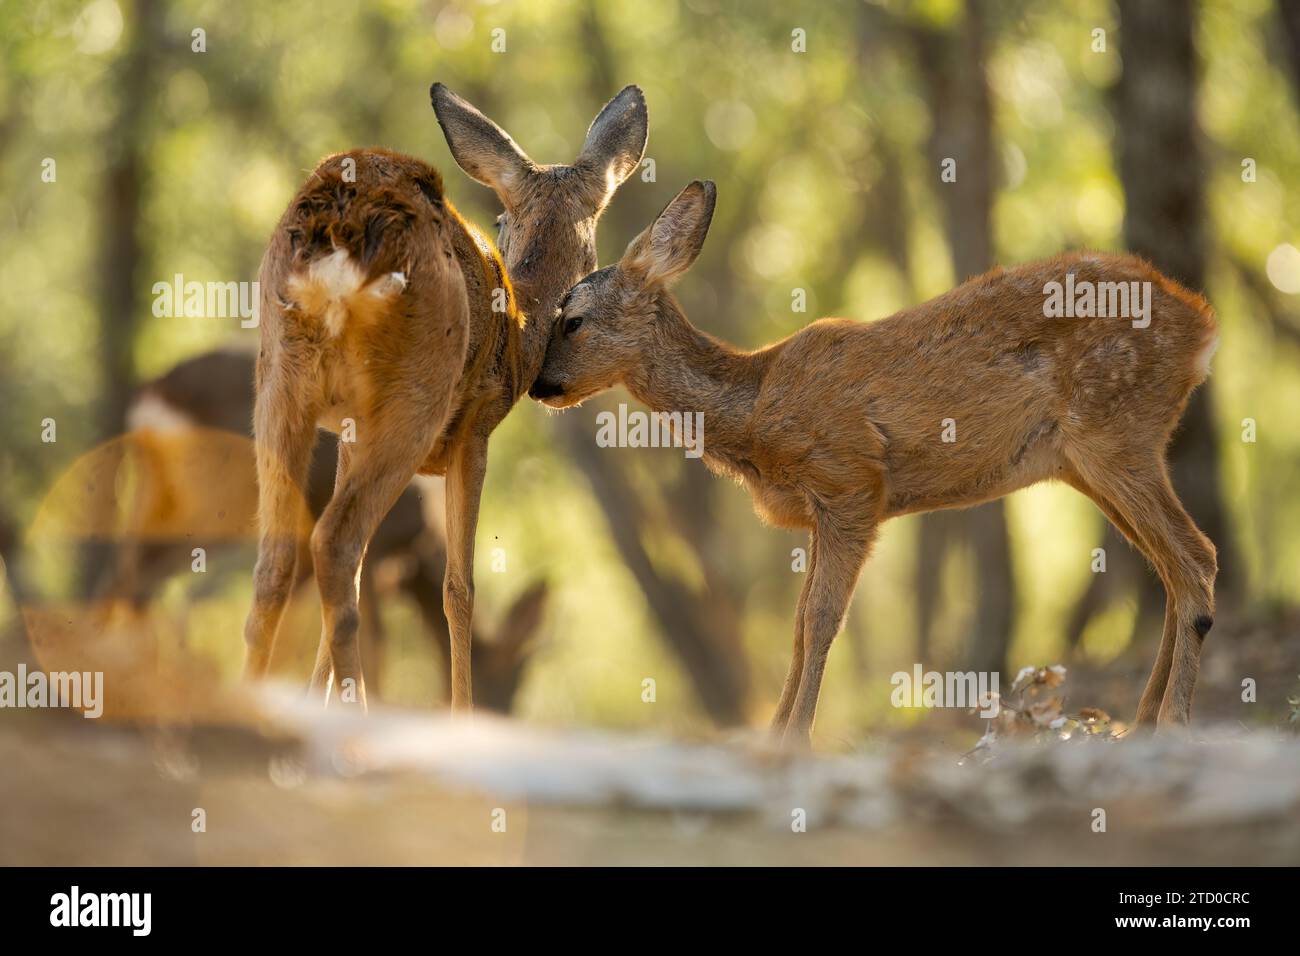 A heartwarming scene of a pair of Roe deer displaying affection amid the tranquil forest setting, captured in soft natural light. Stock Photo